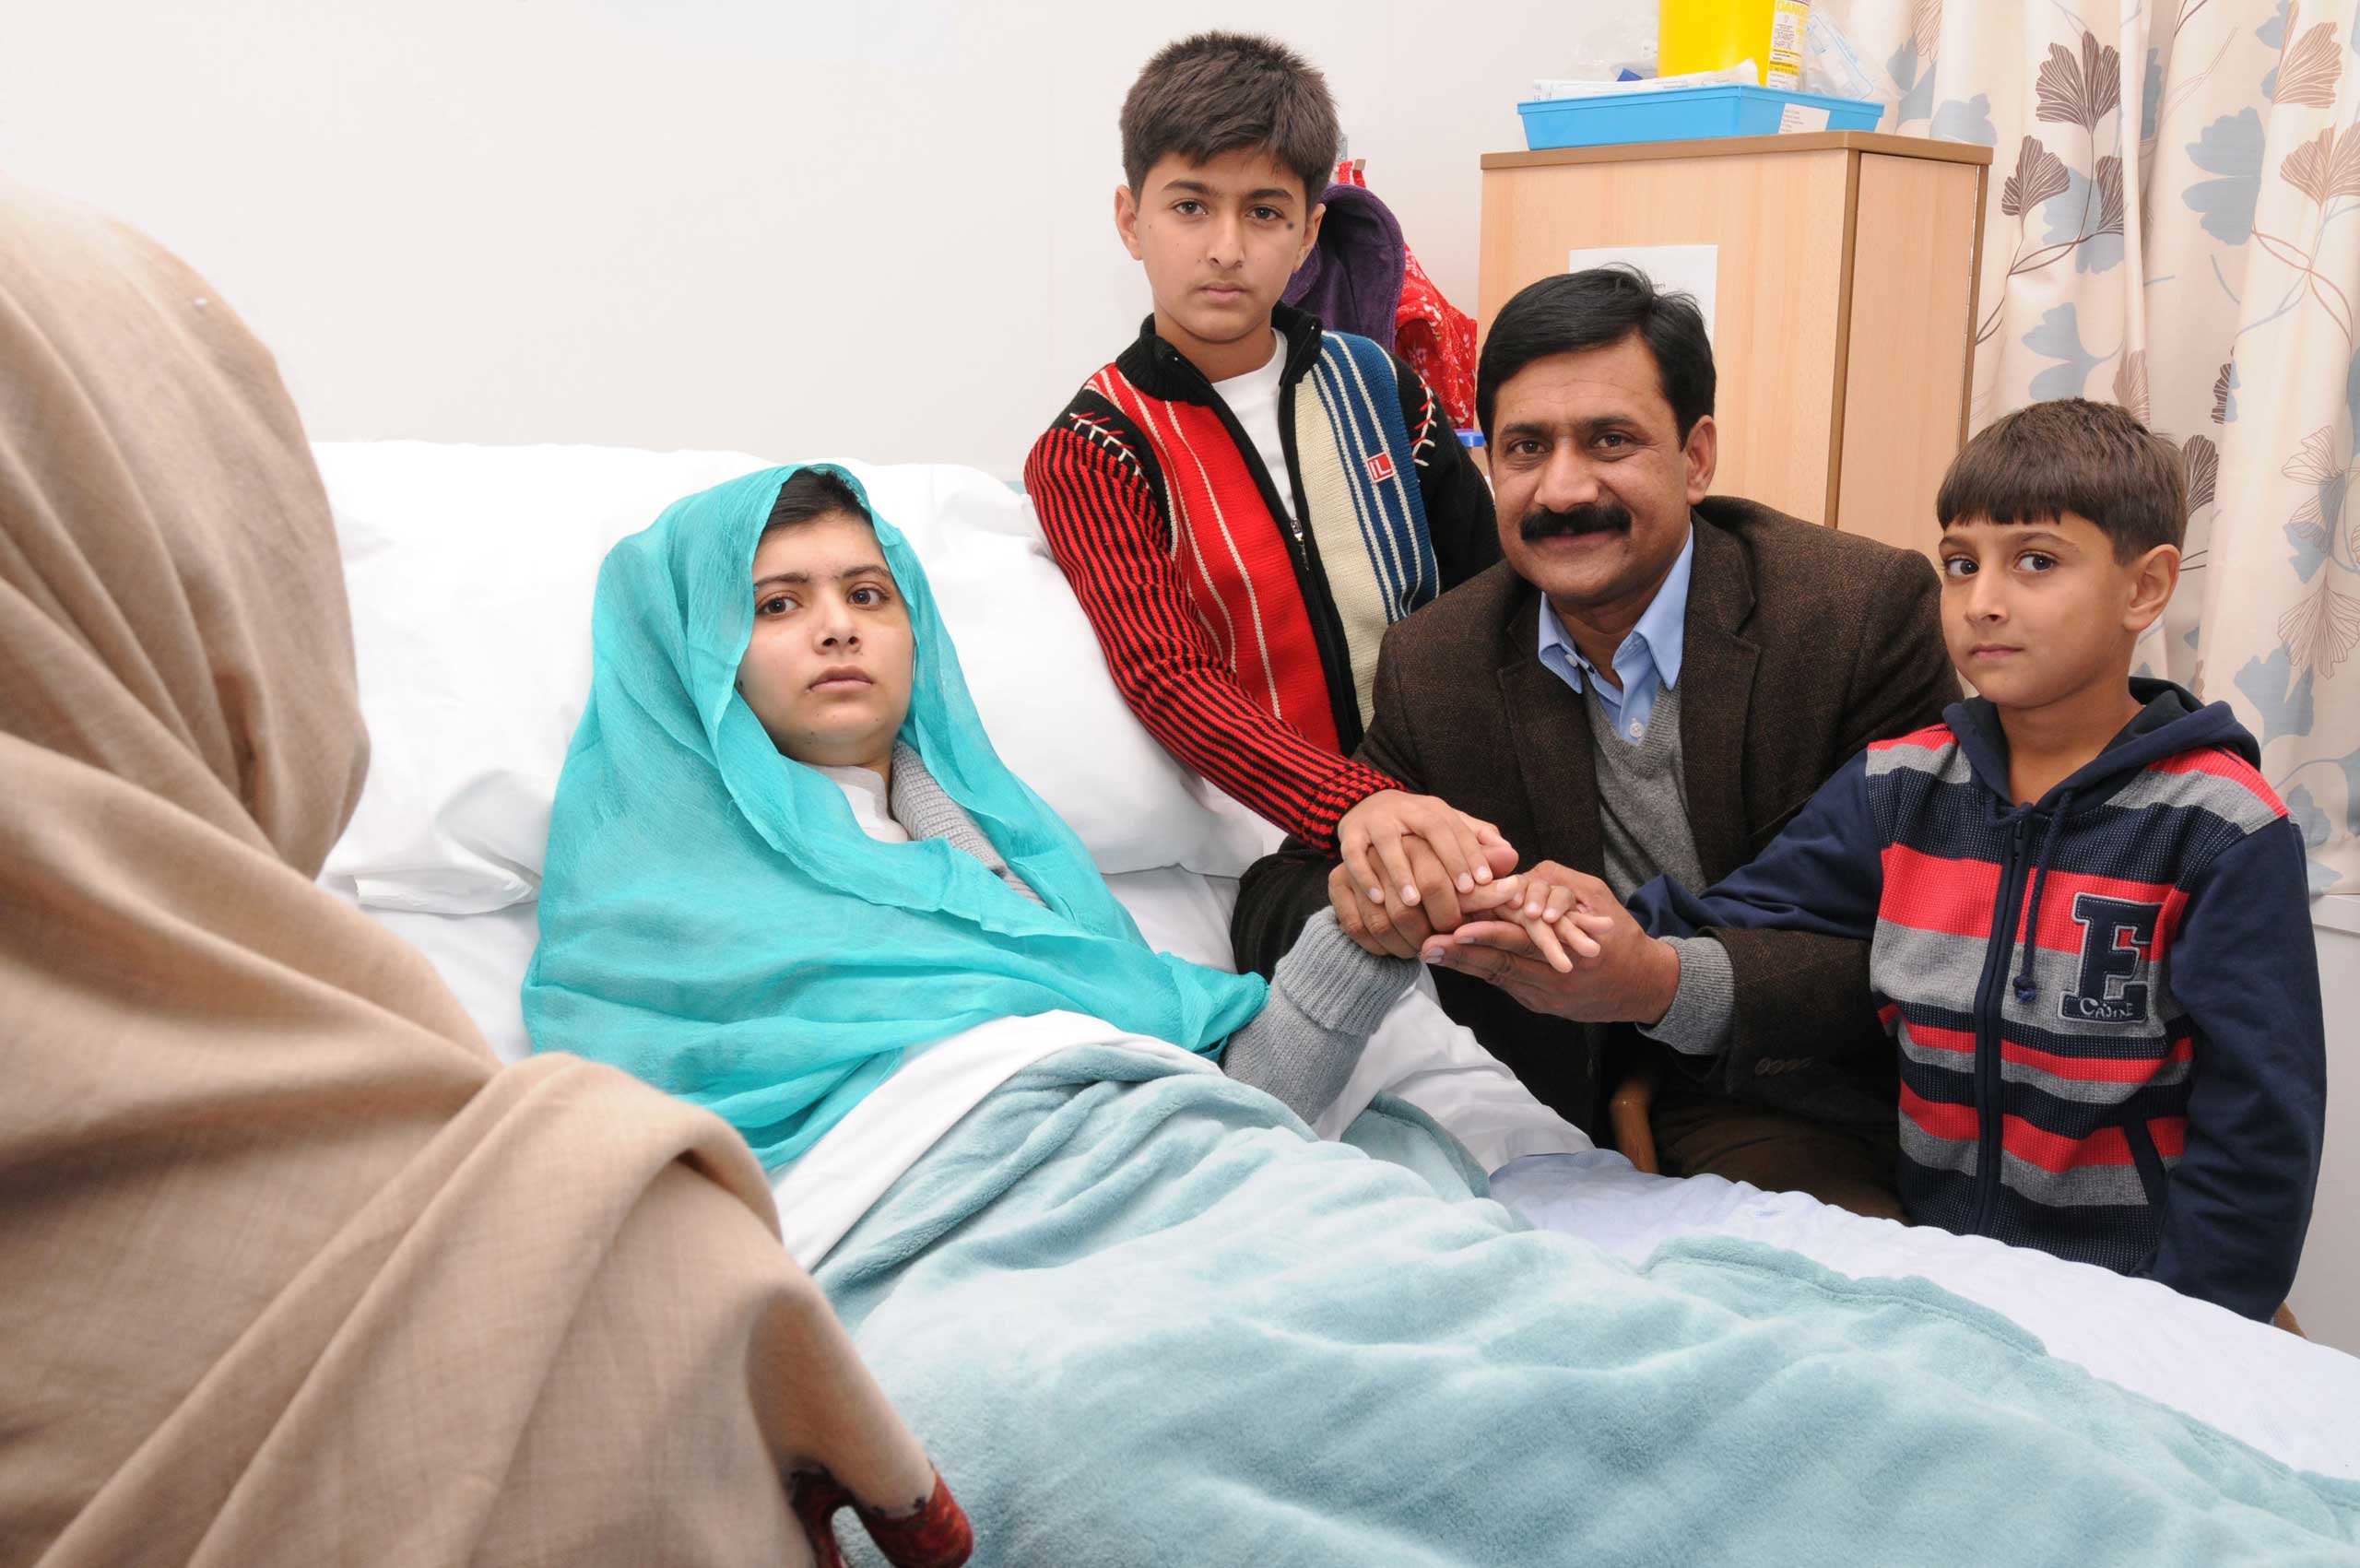 Malala Yousafzai sits up in her hospital bed with her father and her two younger brothers, on Oct. 26, 2012, in Birmingham, United Kingdom. The 15 year-old Malala was being treated after she was shot by the Taliban in Pakistan two weeks earlier.